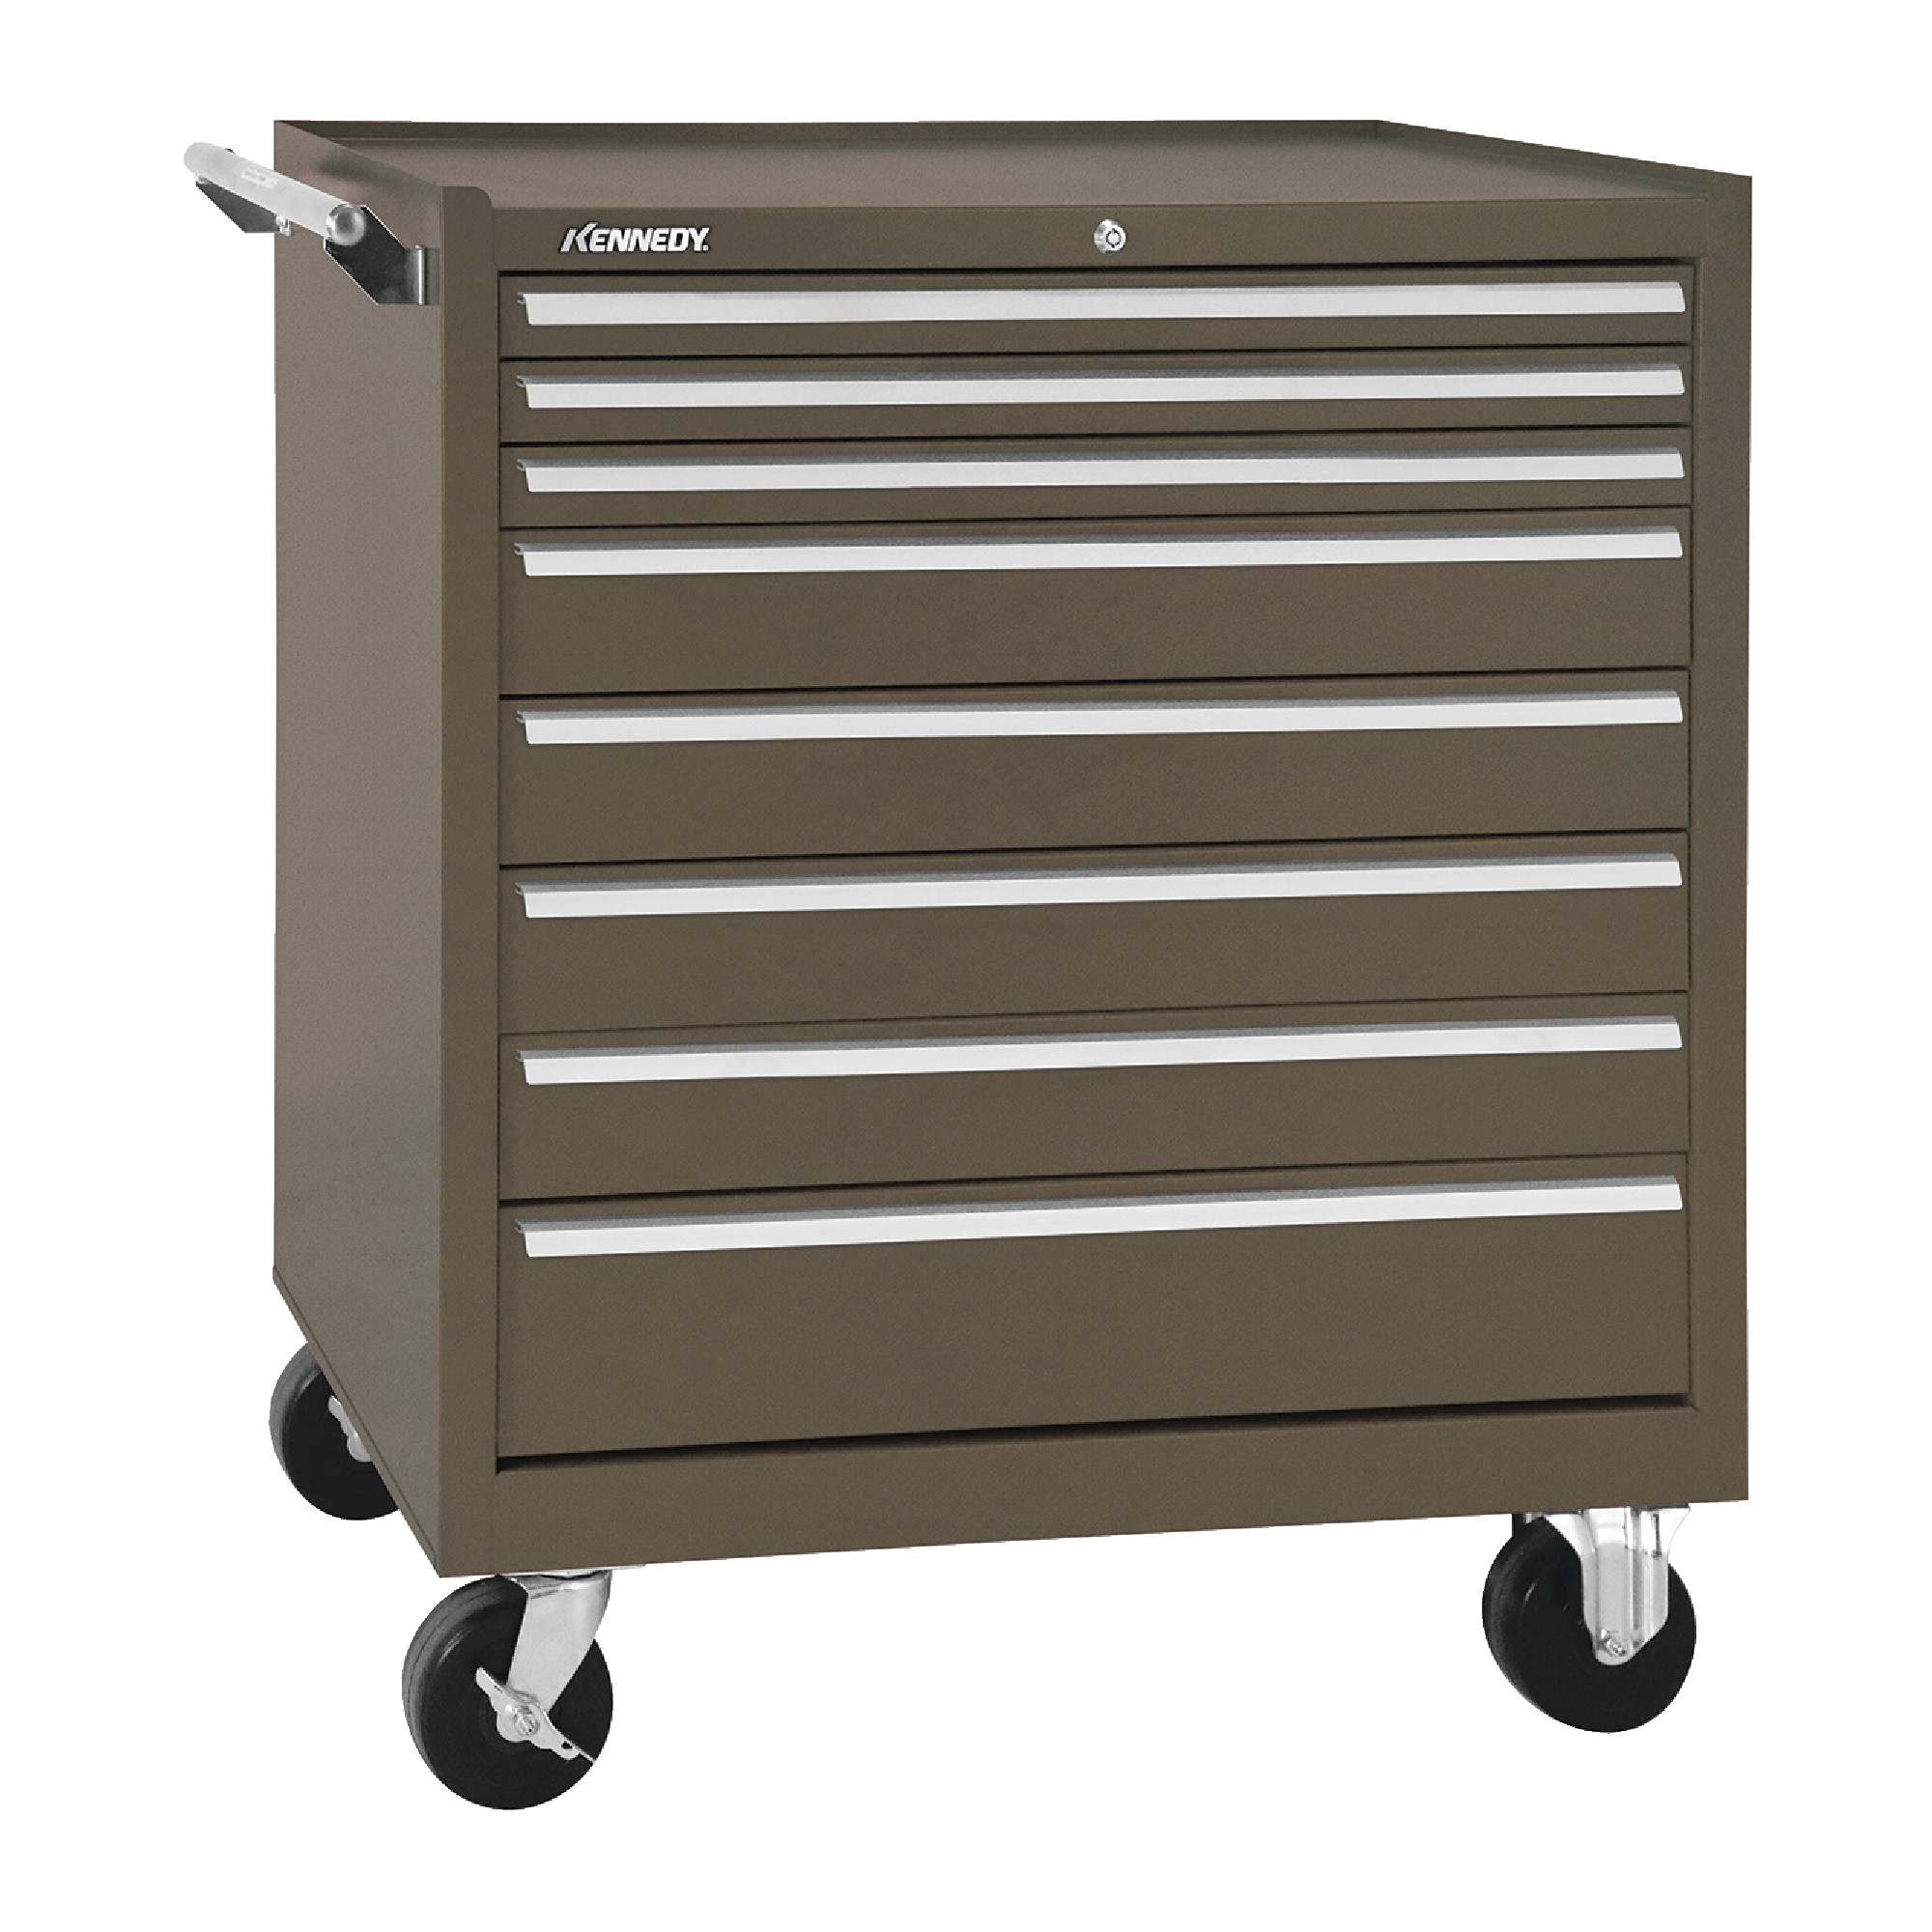 KENNEDY 8 Drawer Roller Cabinet With Ball Bearing Slides